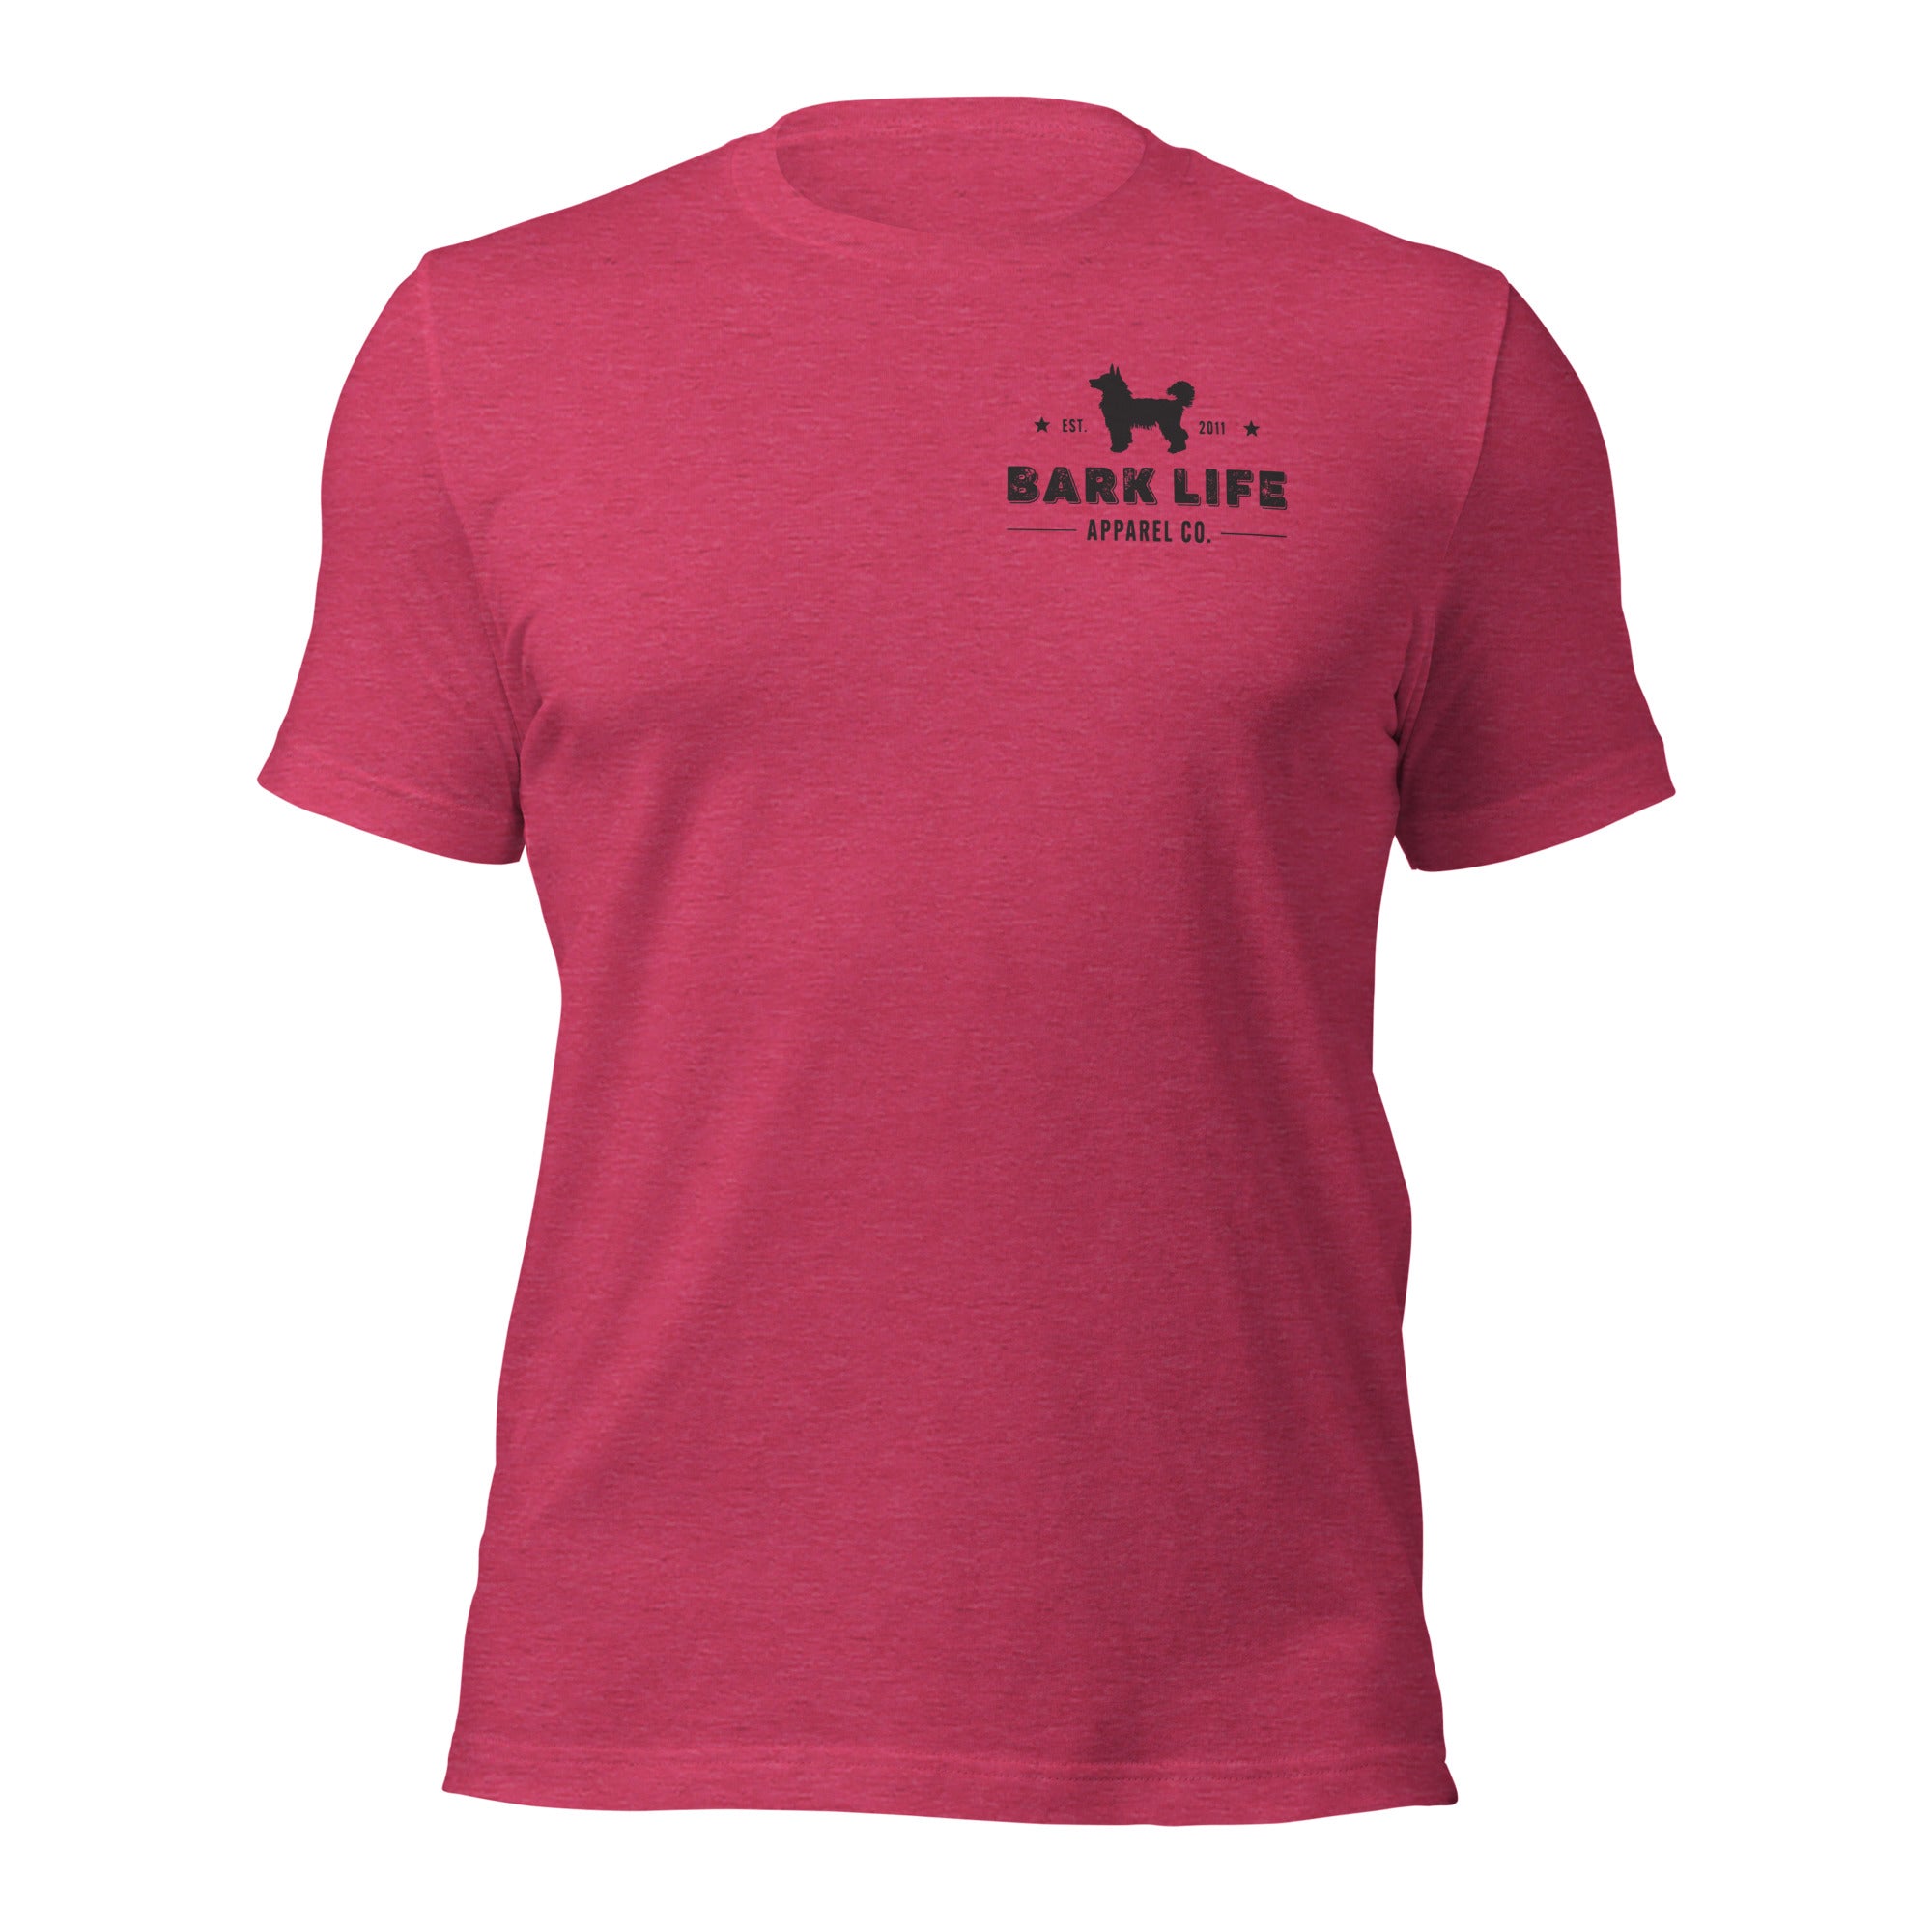 Chinese Crested - Short Sleeve Cotton Tee  Shirt